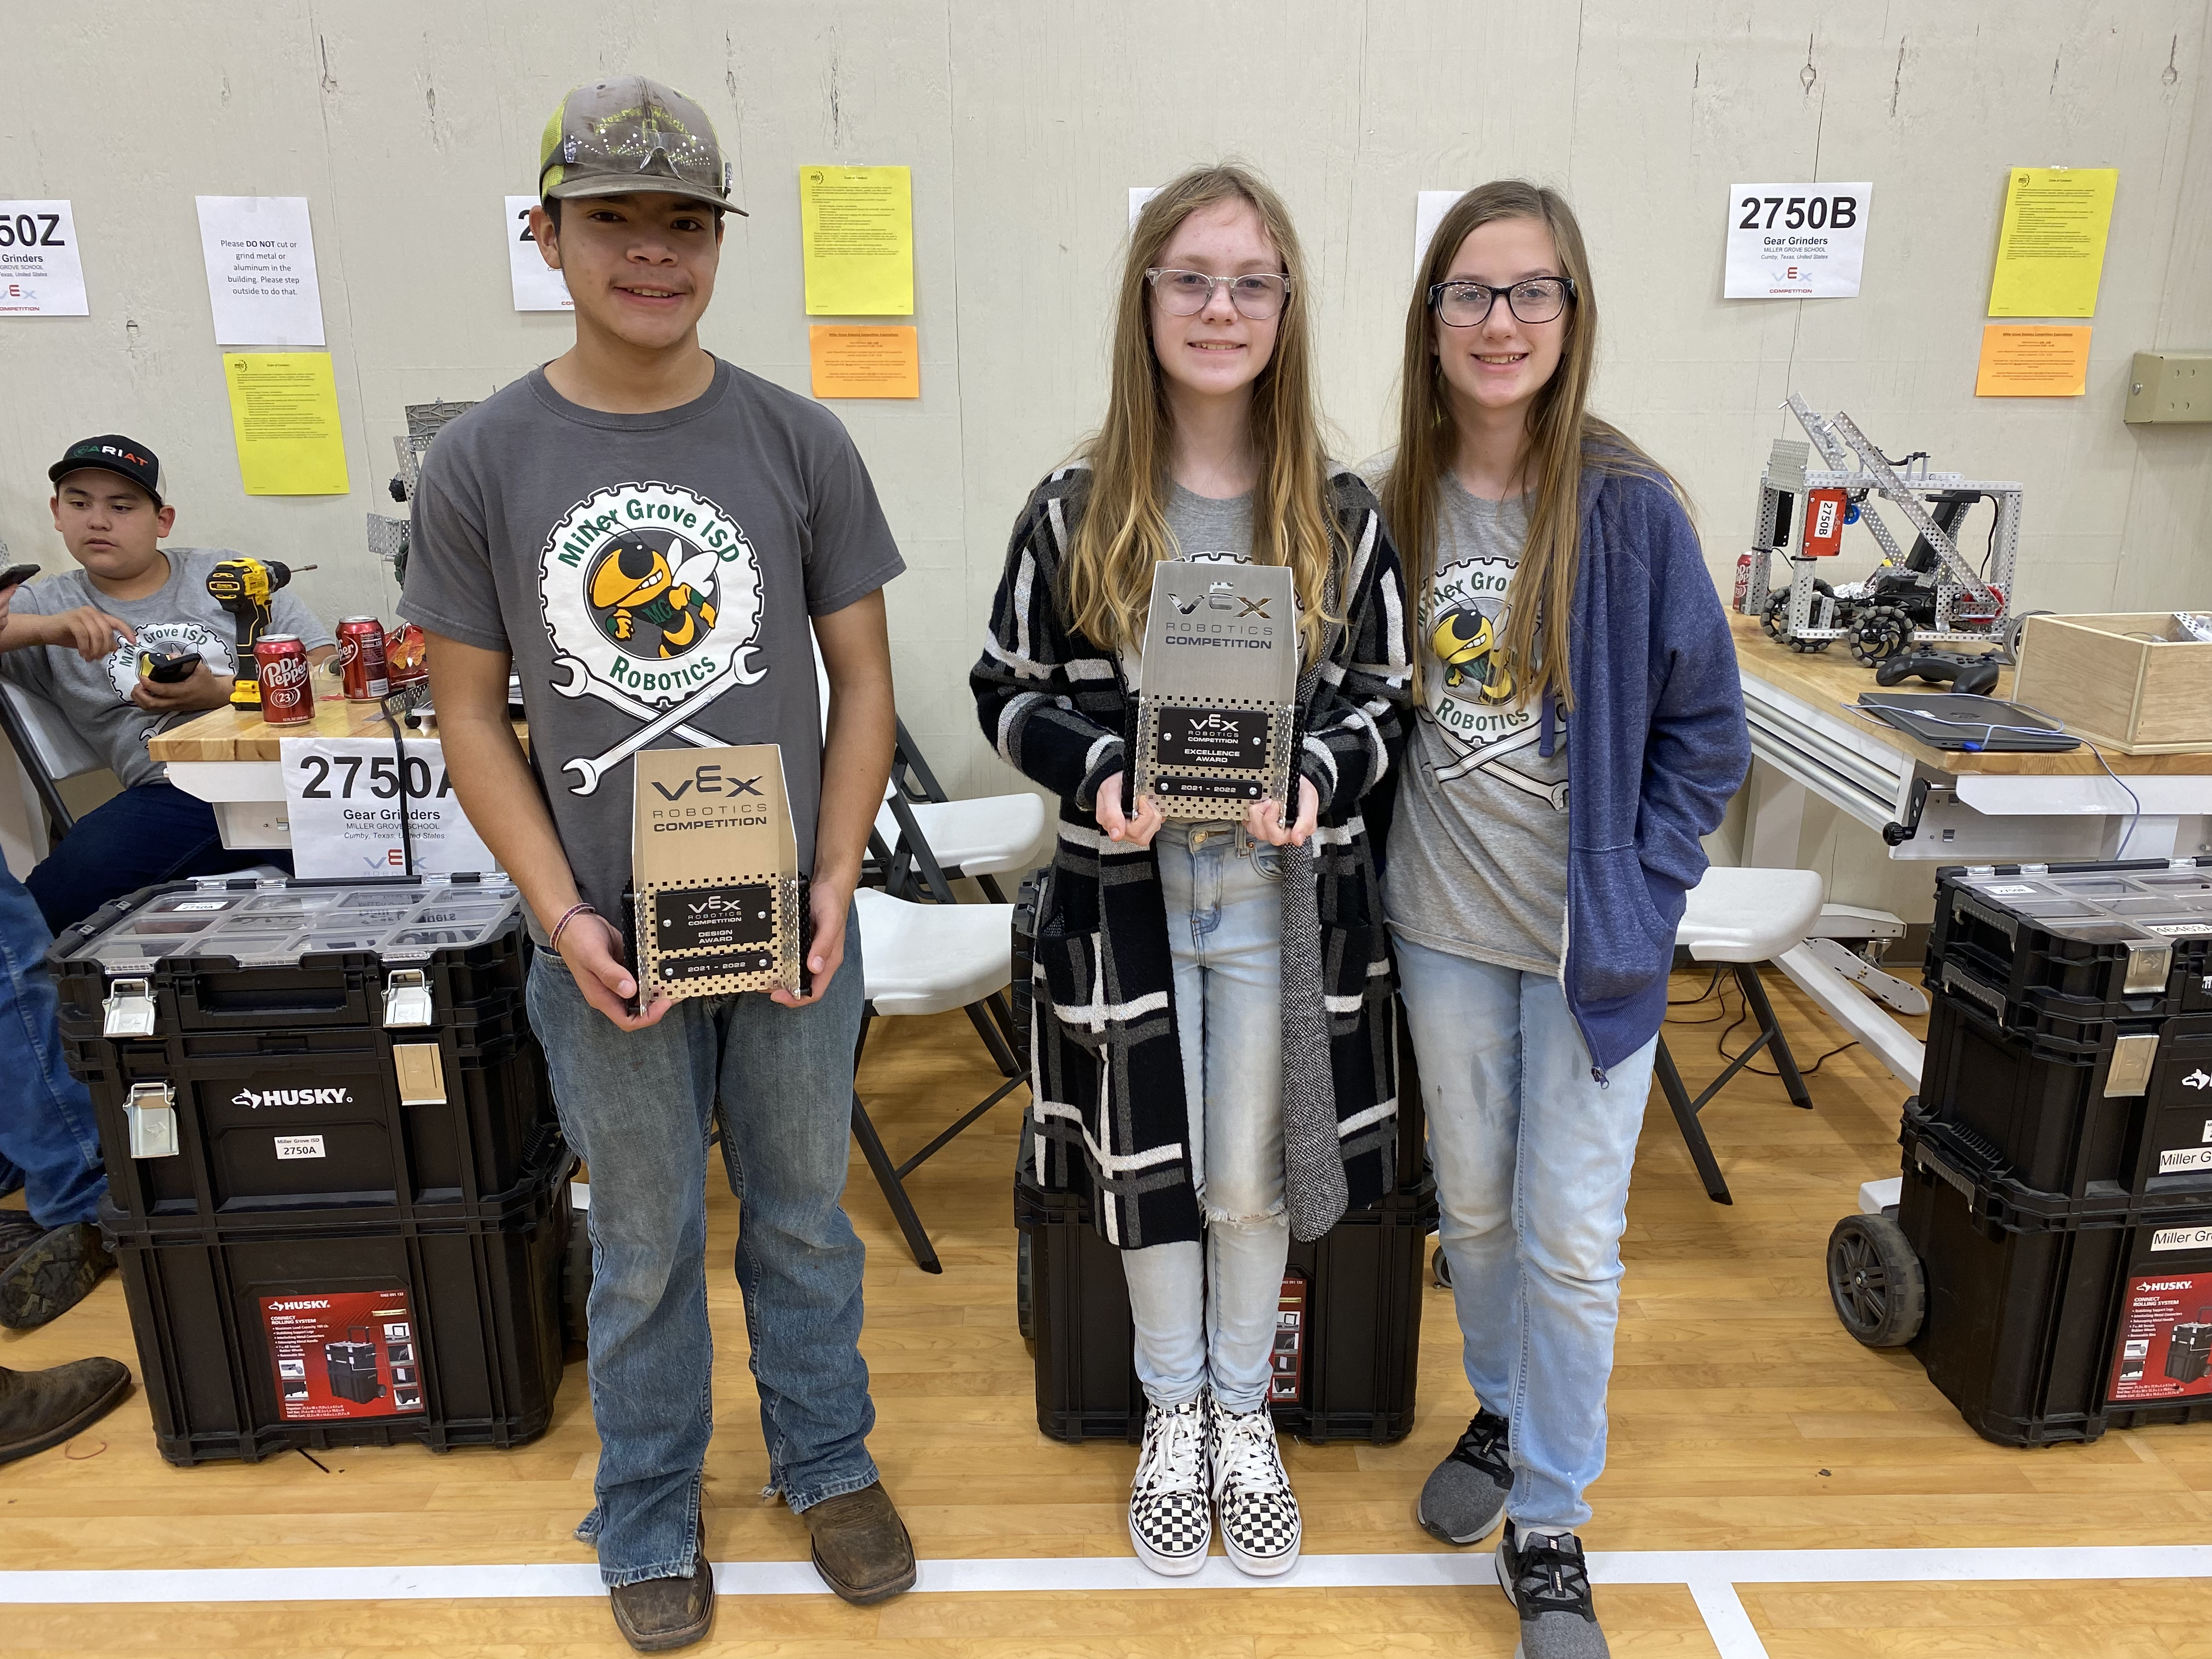 Miller Grove to advance to state with robotics competition